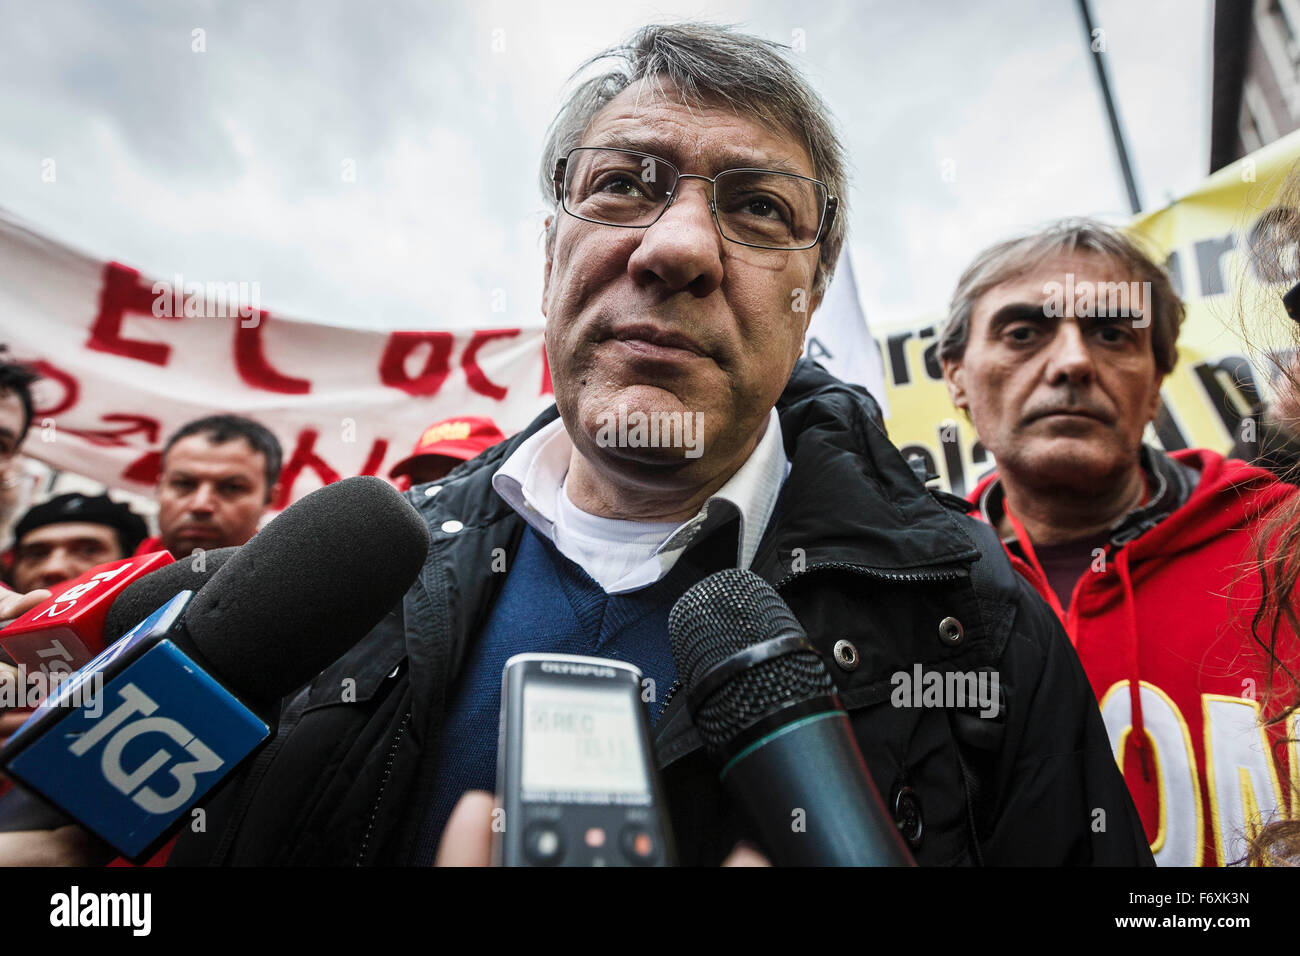 Rome, Italy. 21st Nov, 2015. Maurizio Landini, FIOM CGIL General Secretary, speaks at the press during an anti-government rally to protest against the Italian government's 'Stability Law'. Thousands of demonstrators take part in an anti-government rally called by FIOM CGIL, Italy's metalworkers' trade union, in downtown Rome to protest against the Italian government's 'Stability Law'. Credit:  Giuseppe Ciccia/Pacific Press/Alamy Live News Stock Photo